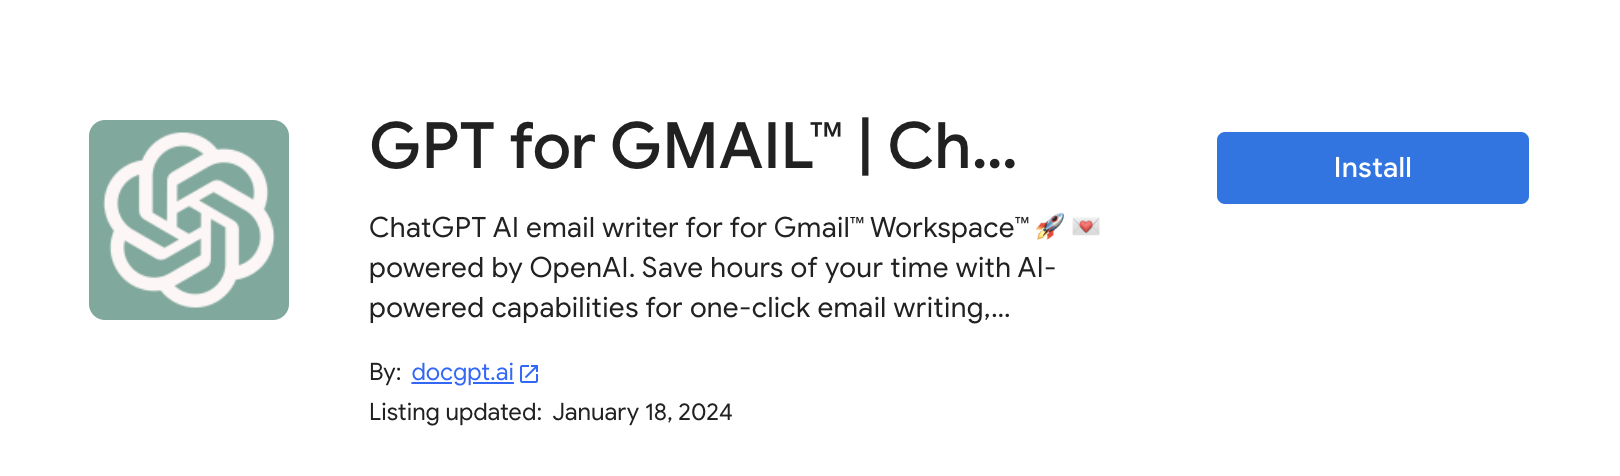 Install-GPT-for-Gmail